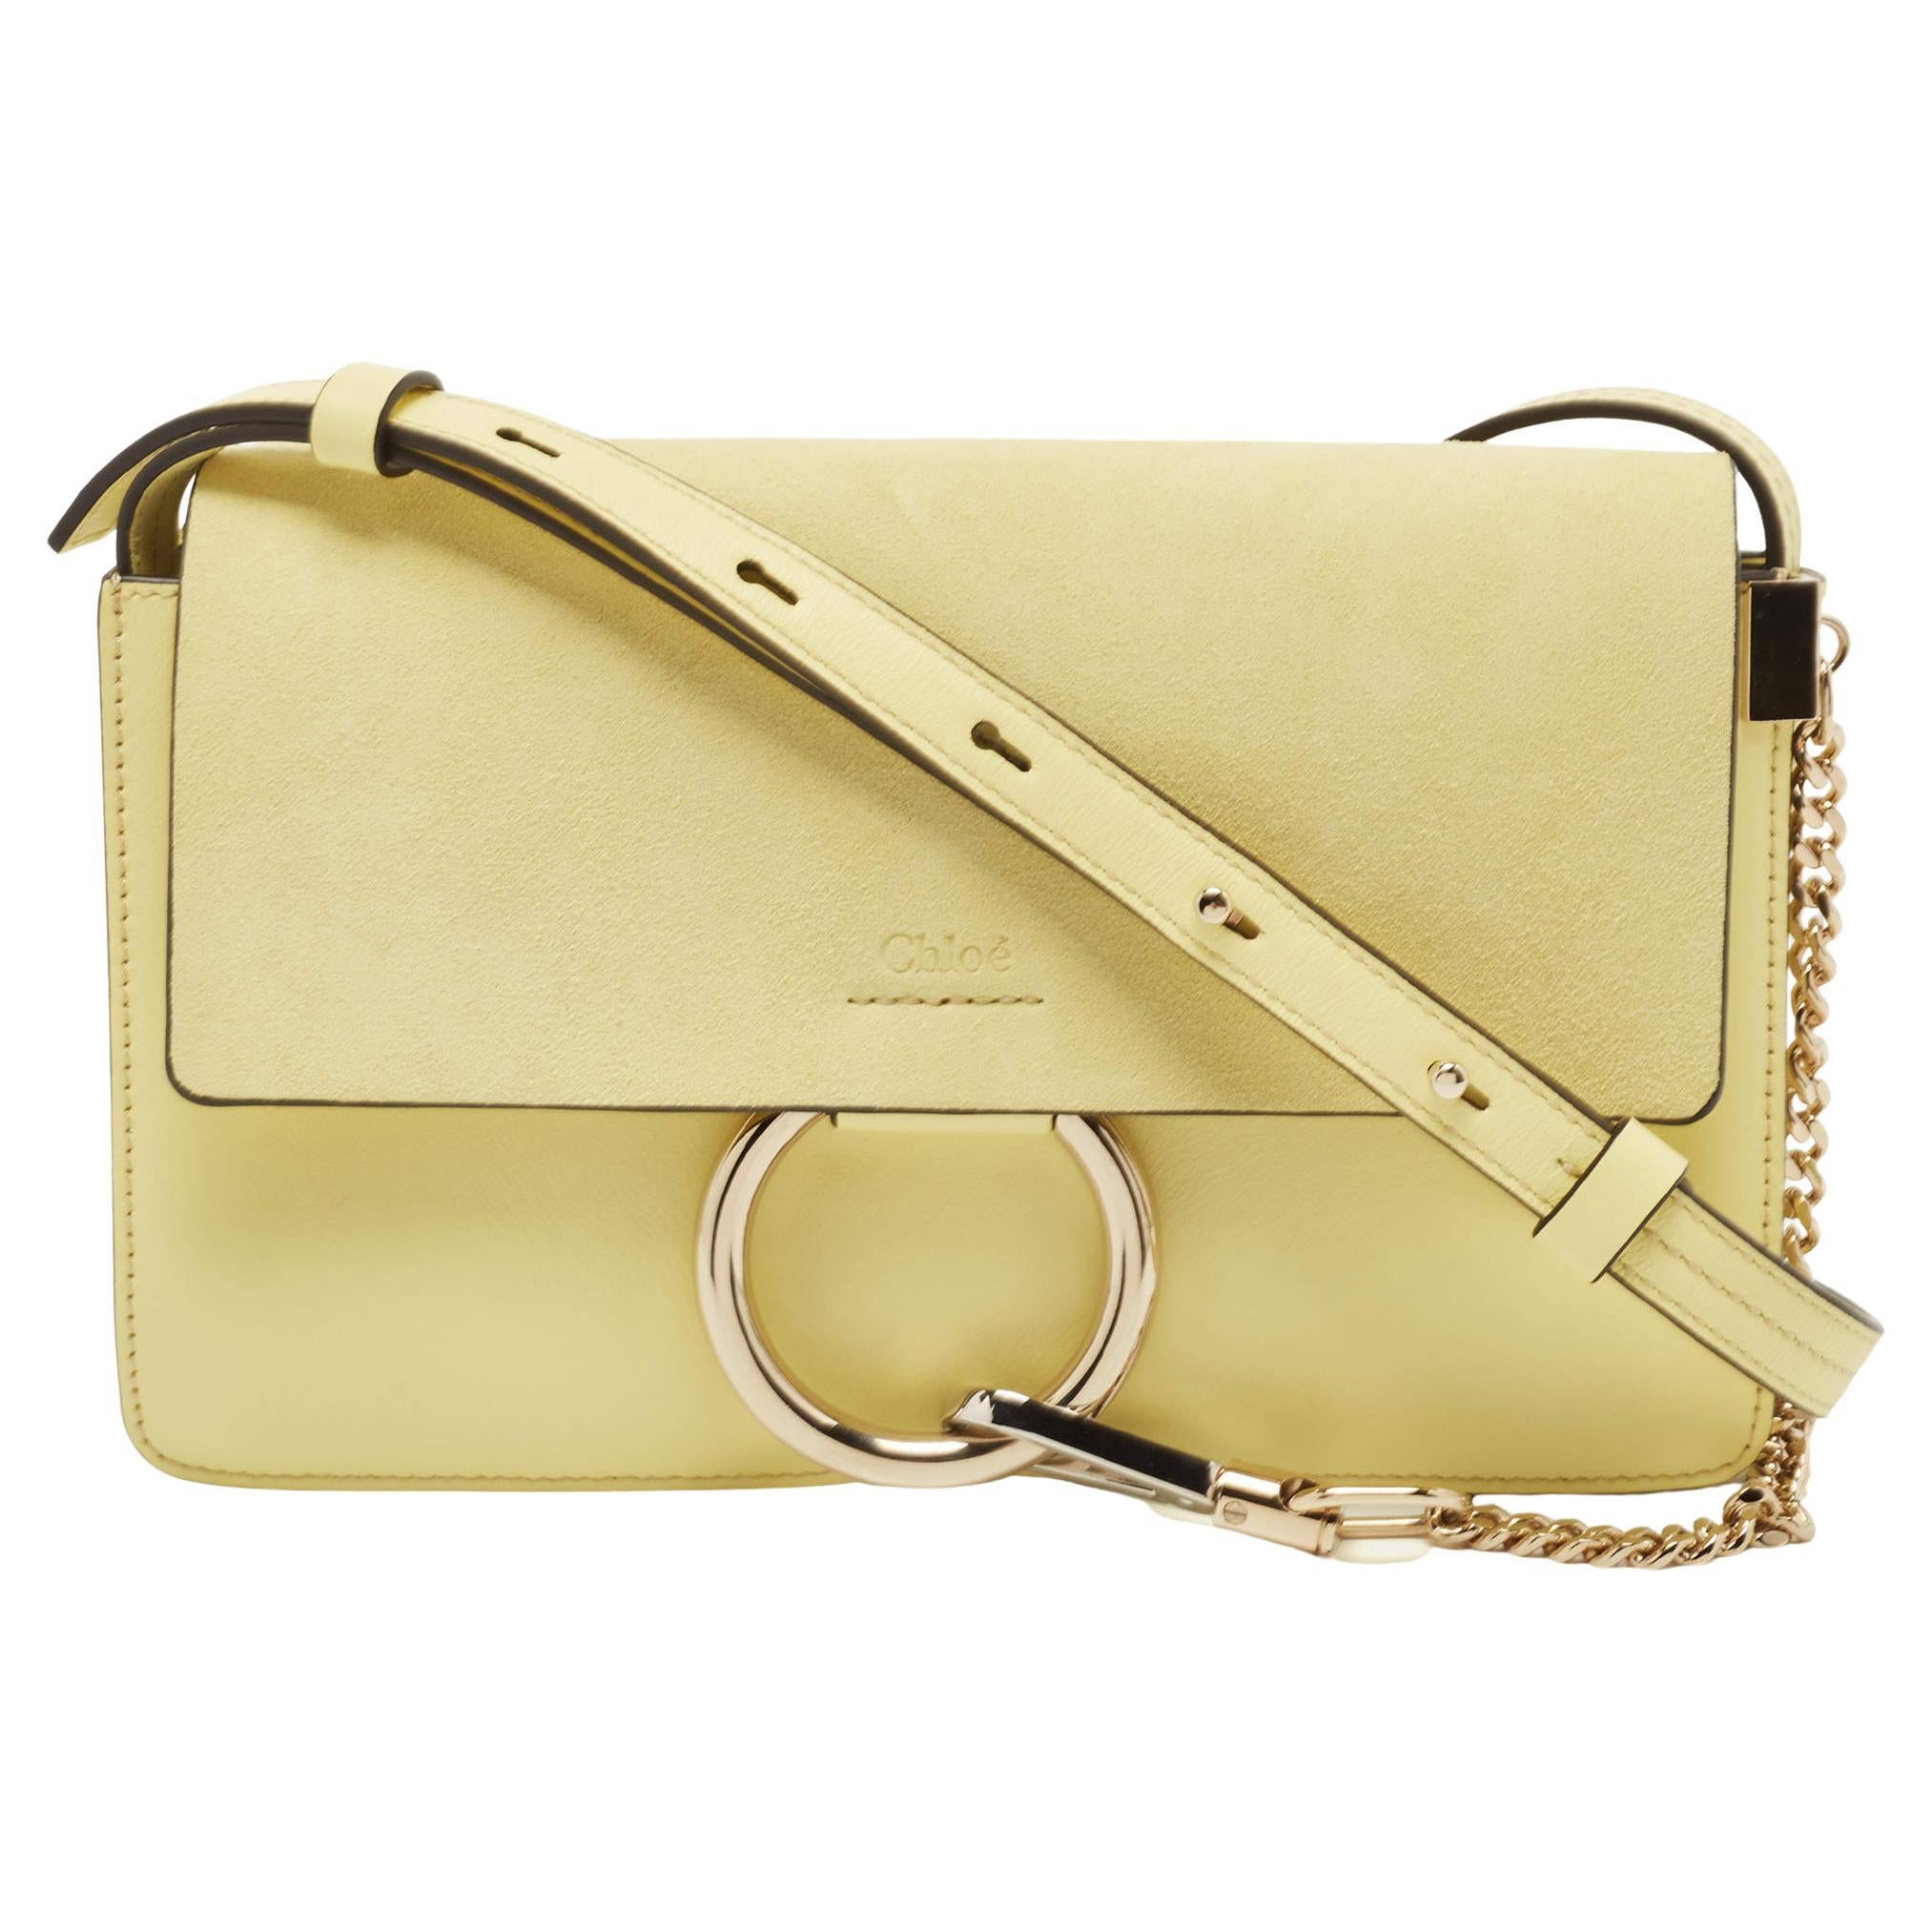 Chloe Yellow Leather and Suede Small Faye Shoulder Bag